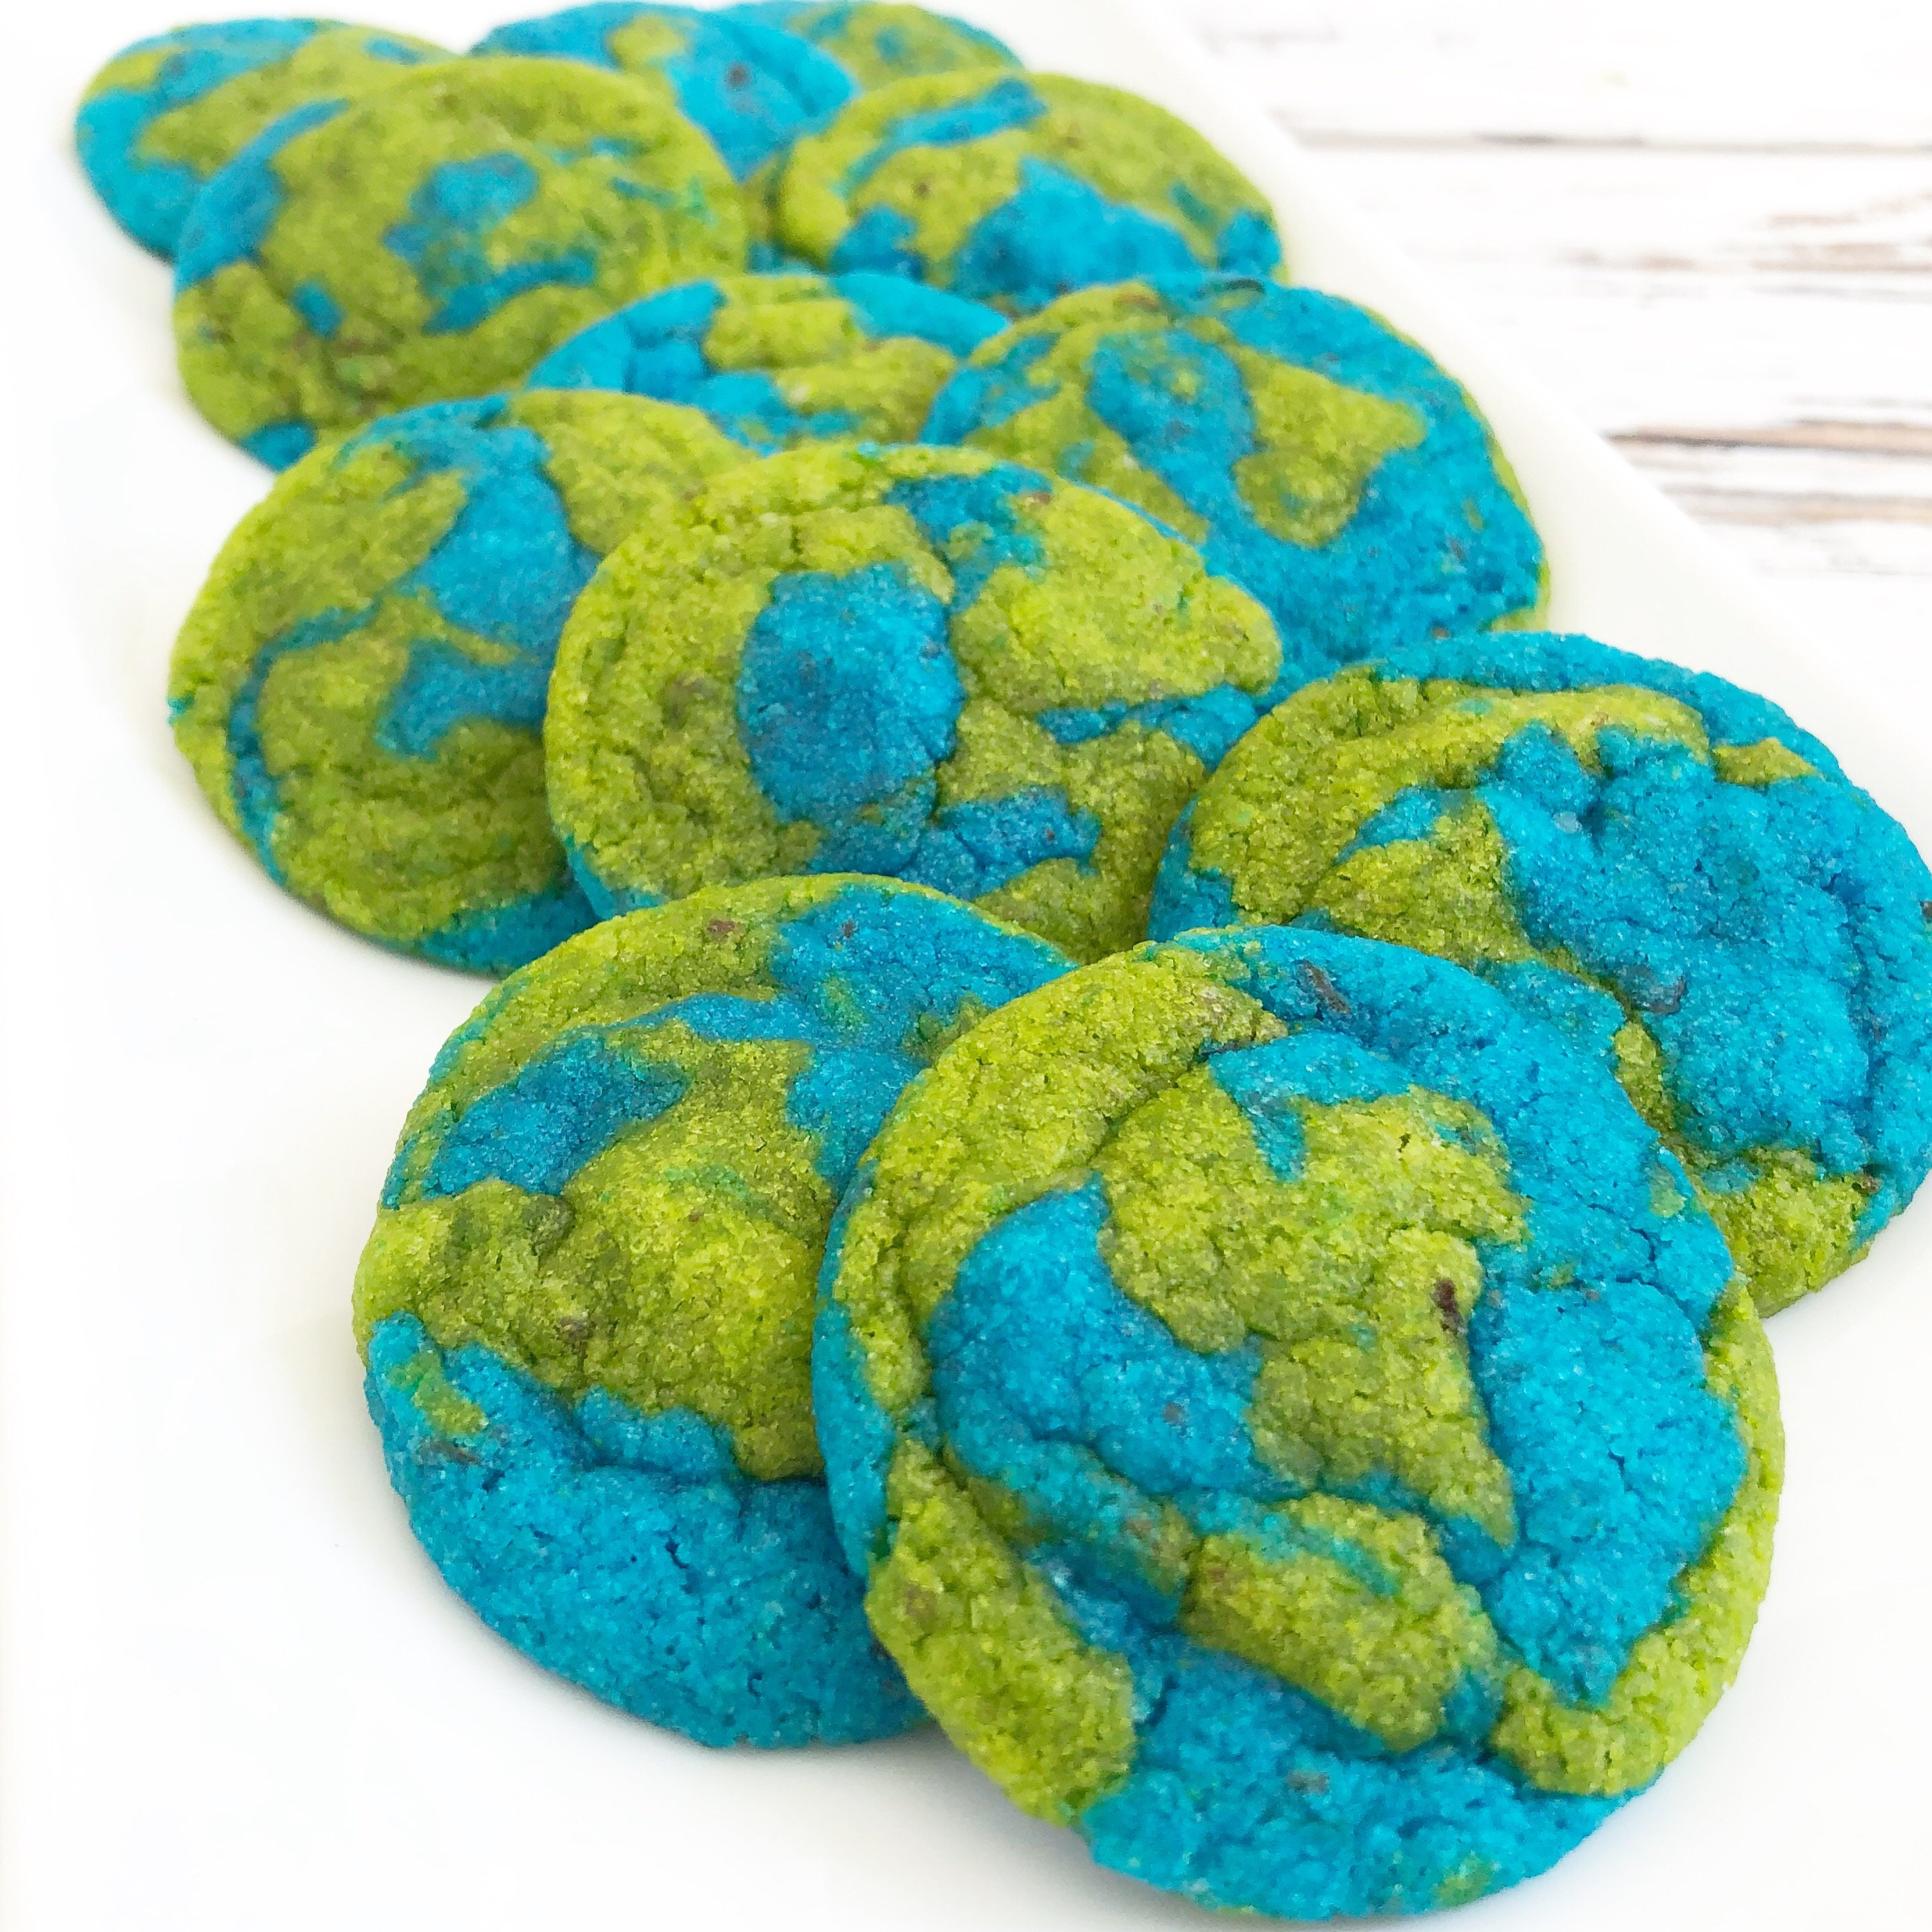 Vegan Earth Day Cookies! These semi-homemade and dairy-free cookies are super easy to make and are absolutely perfect for Earth Day! via @thiswifecooks